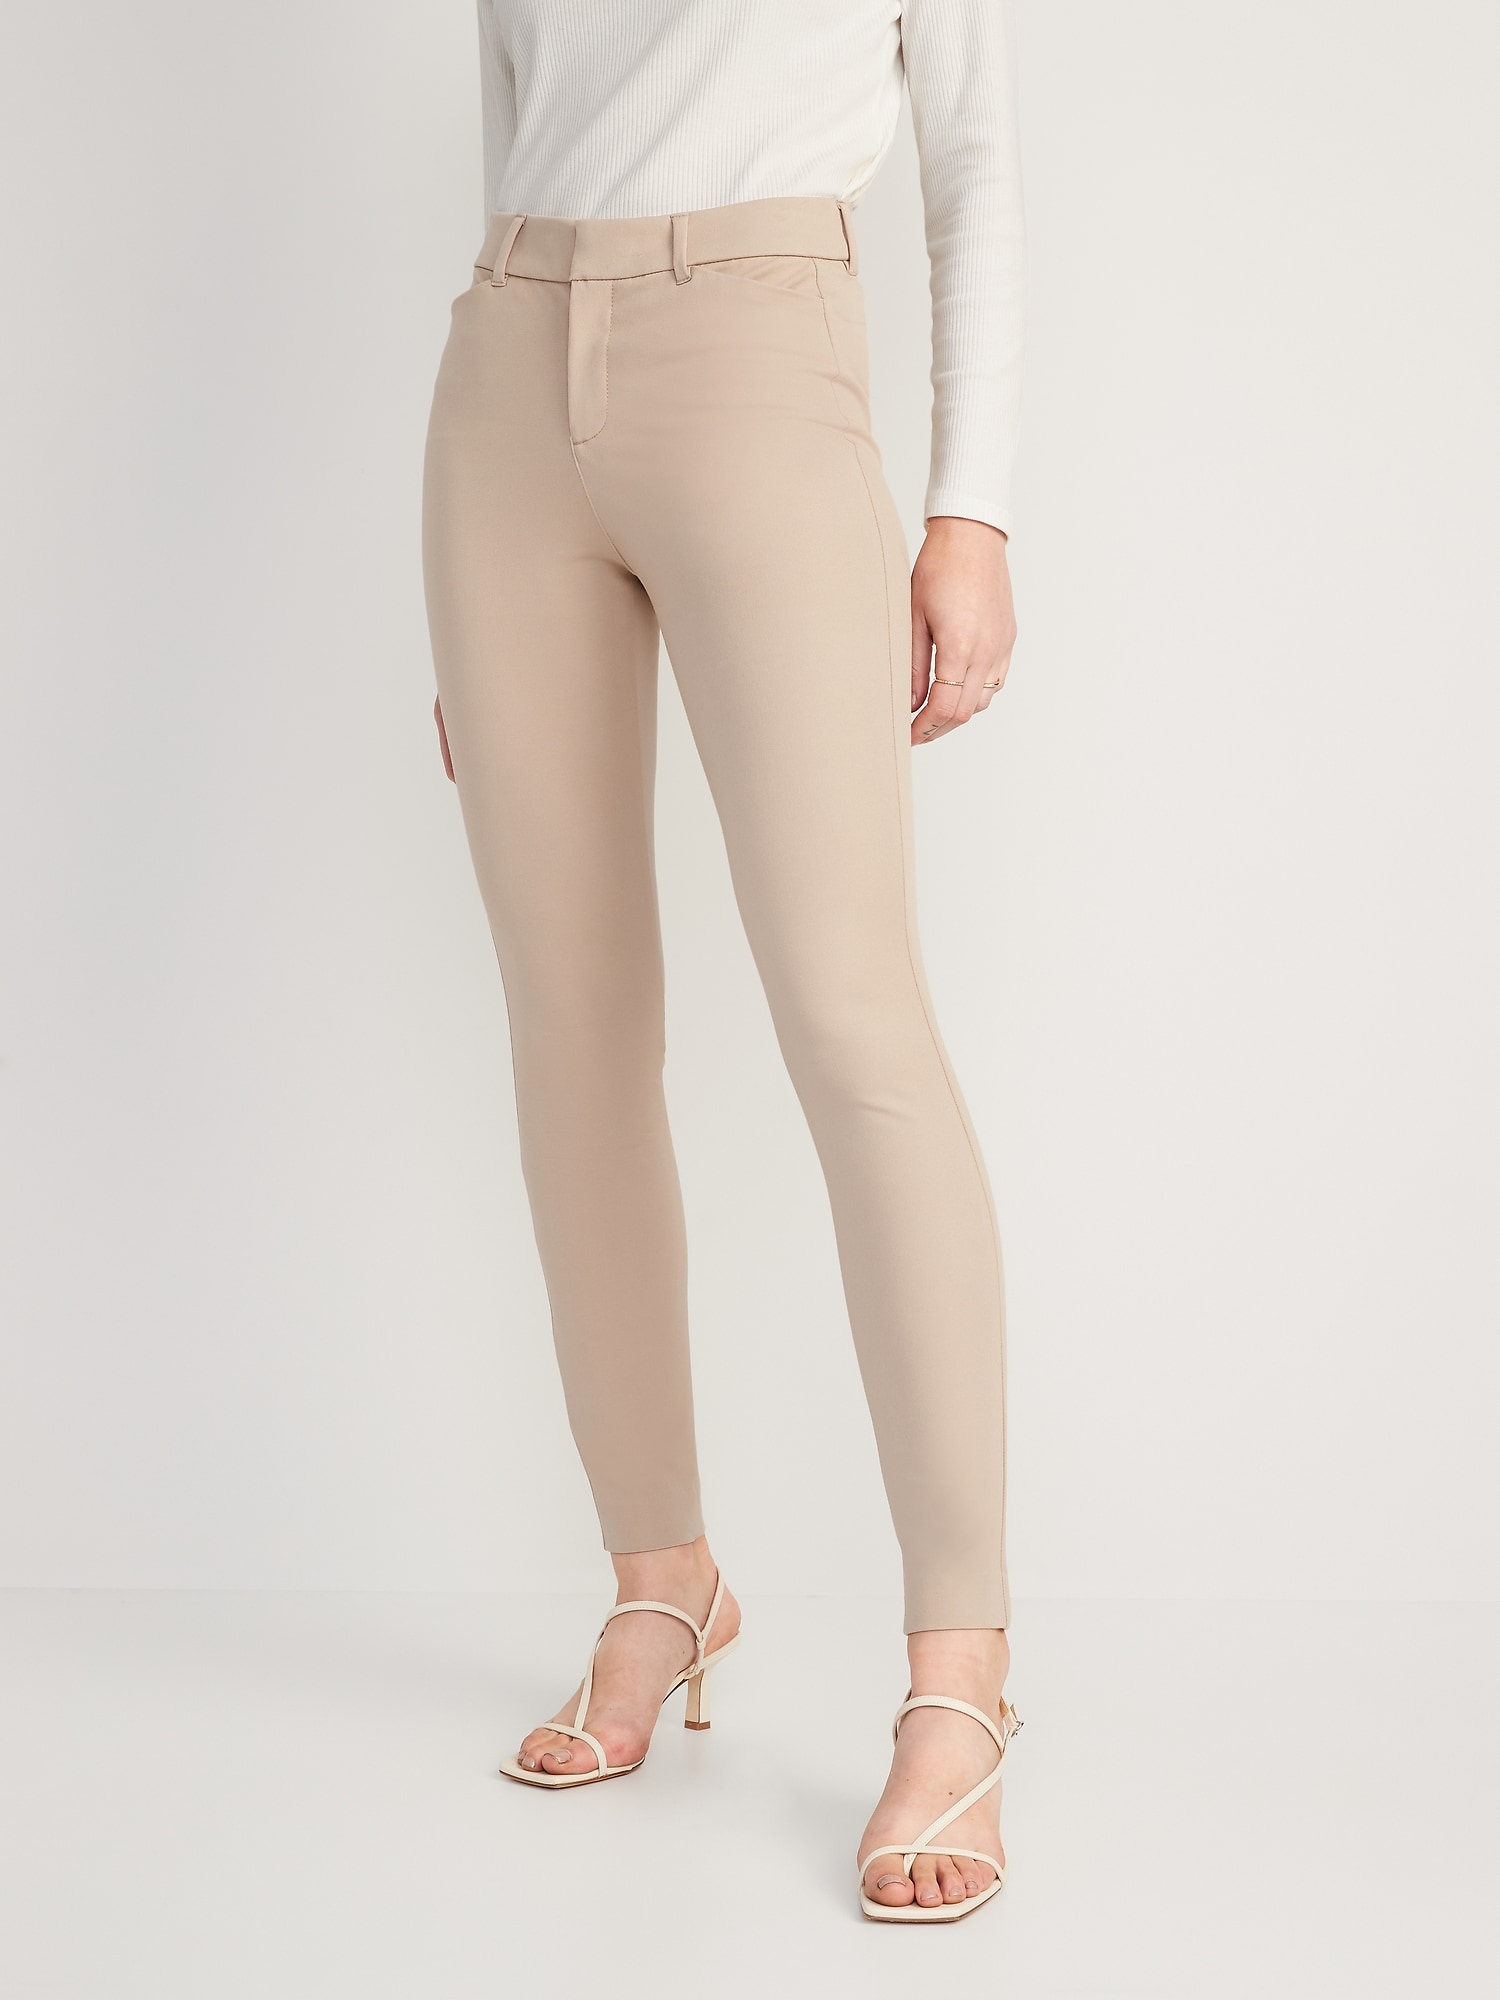 Get Lucky Beige Vegan Leather Pants | Leather pants, Faux leather pants,  Pants for women